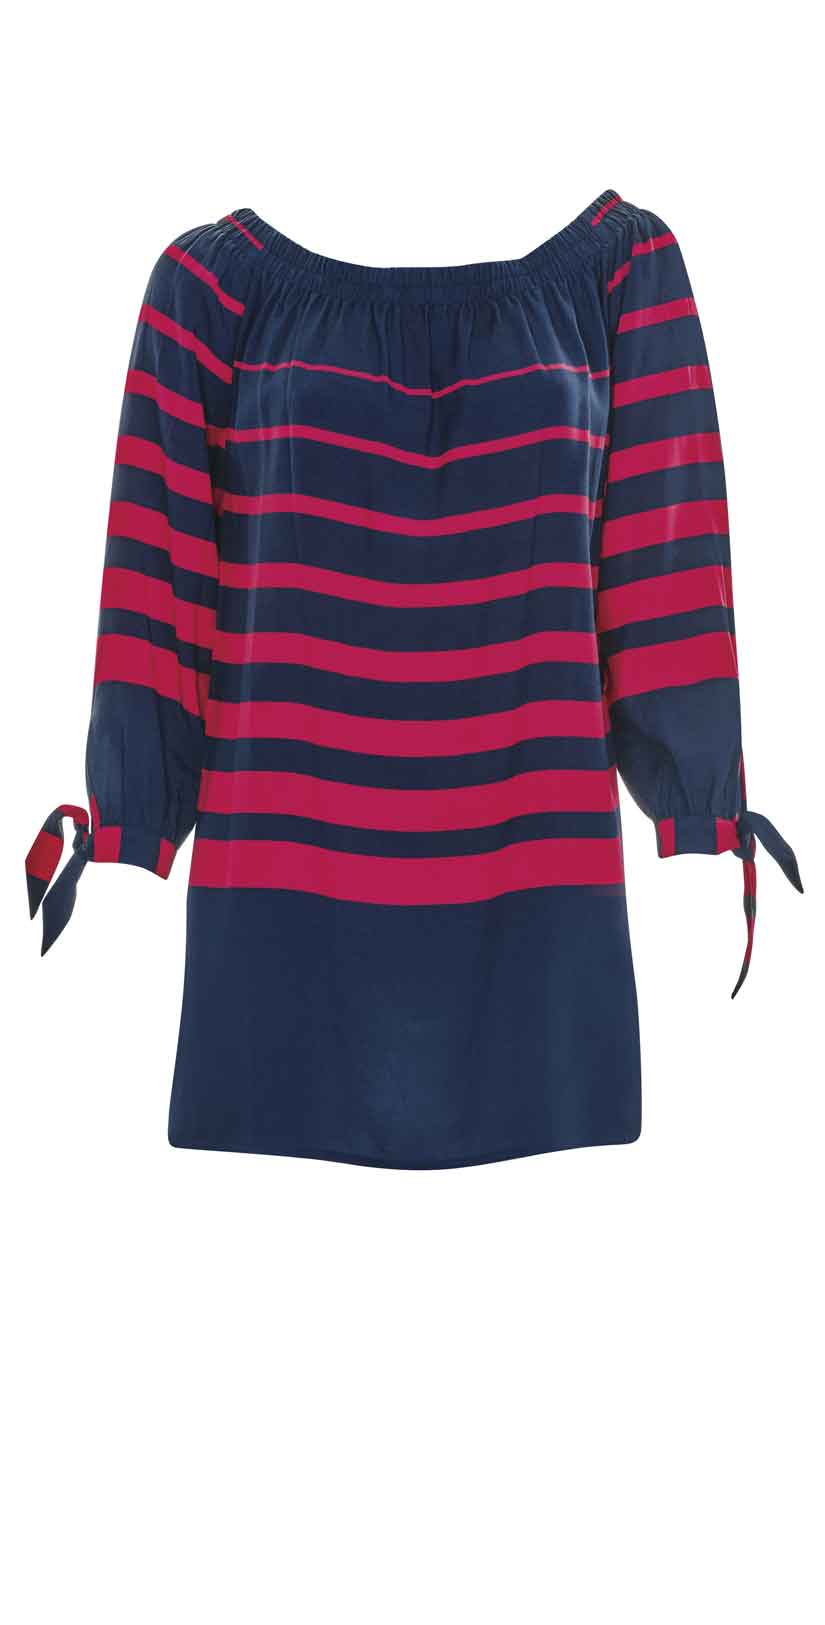 Sunflair New Nautic Beach Blouse front